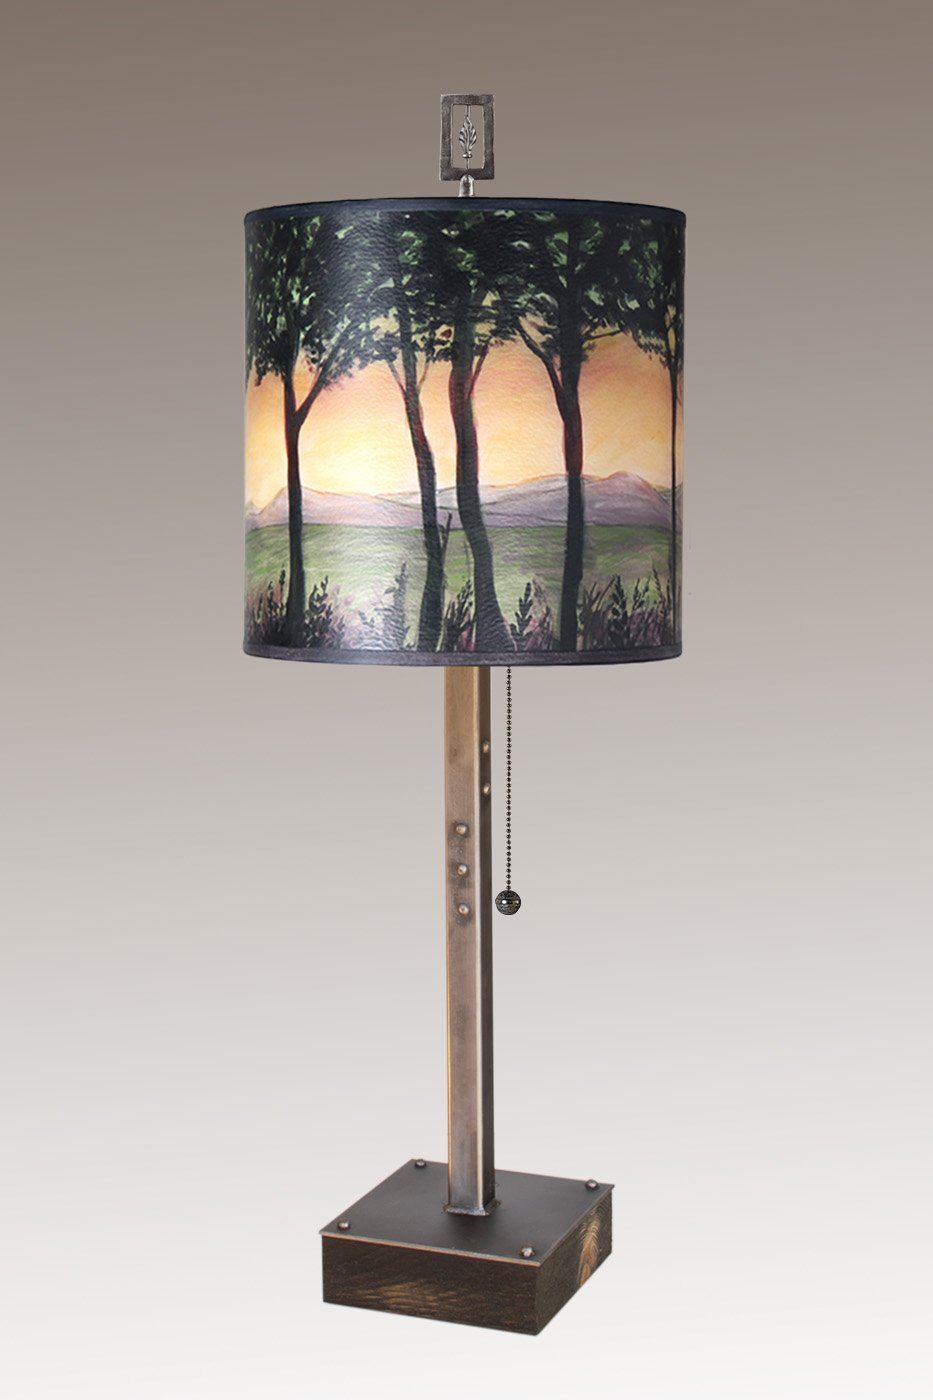 Janna Ugone & Co Table Lamps Steel Table Lamp on Wood with Medium Drum Shade in Dawn